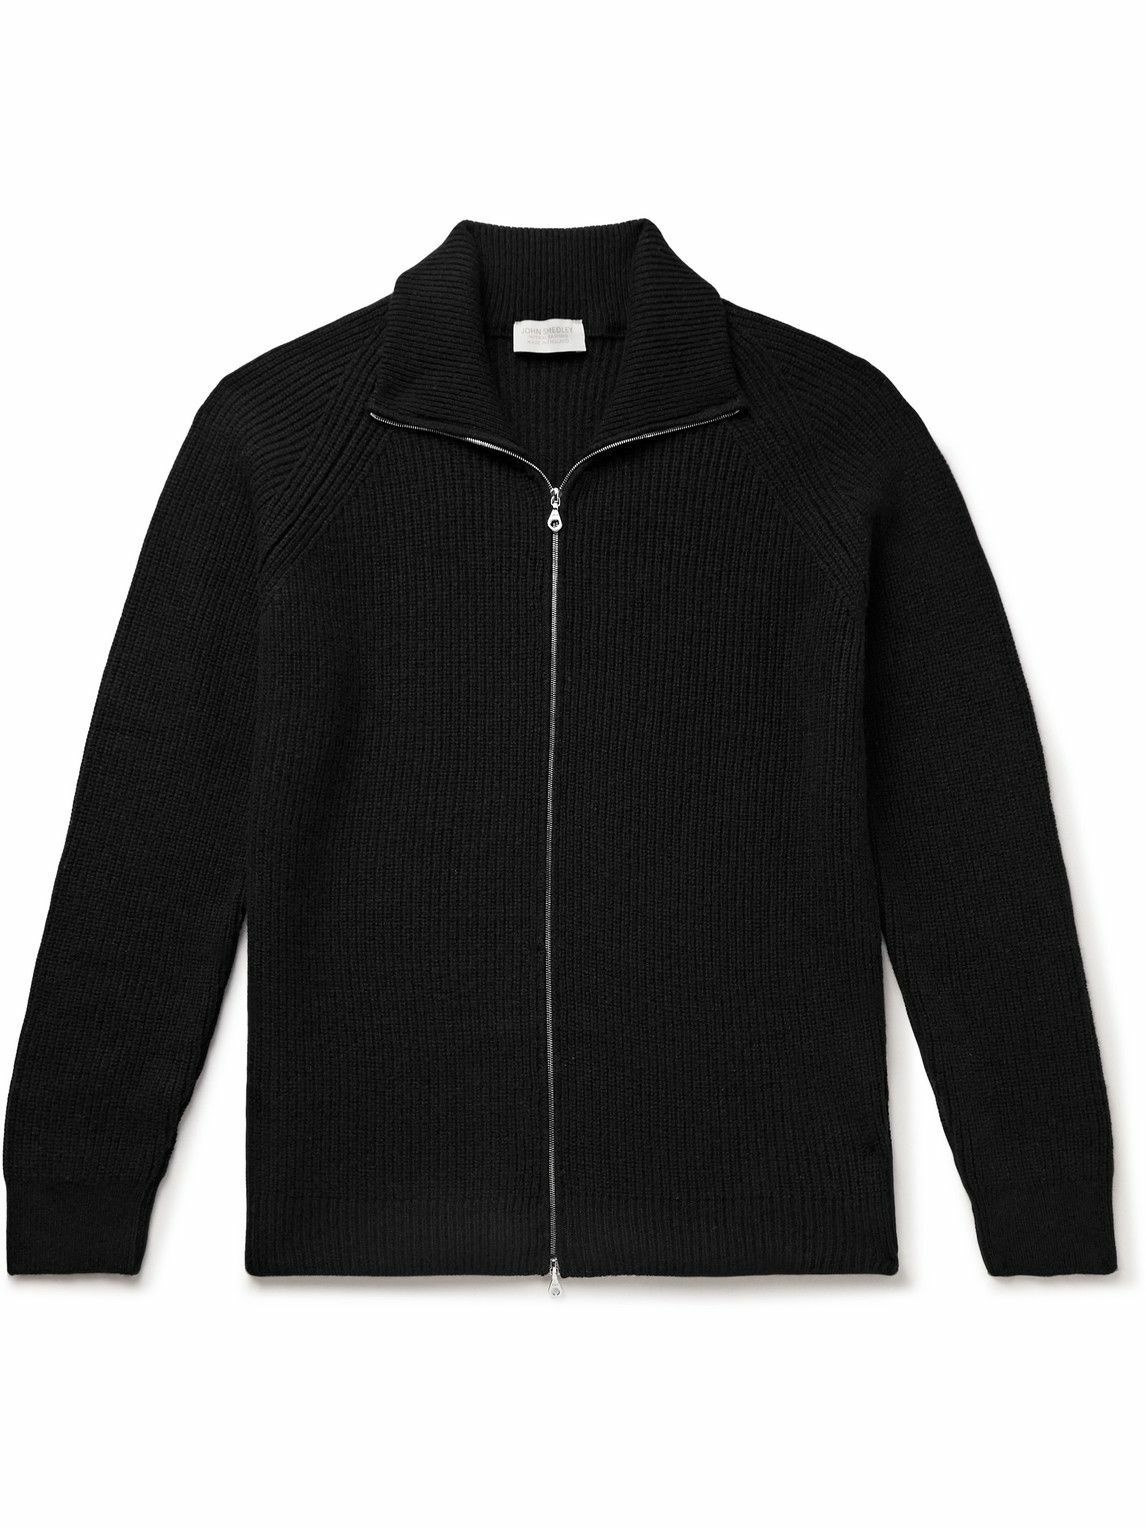 John Smedley - Thatch Recycled-Cashmere and Merino Wool-Blend Zip-Up ...